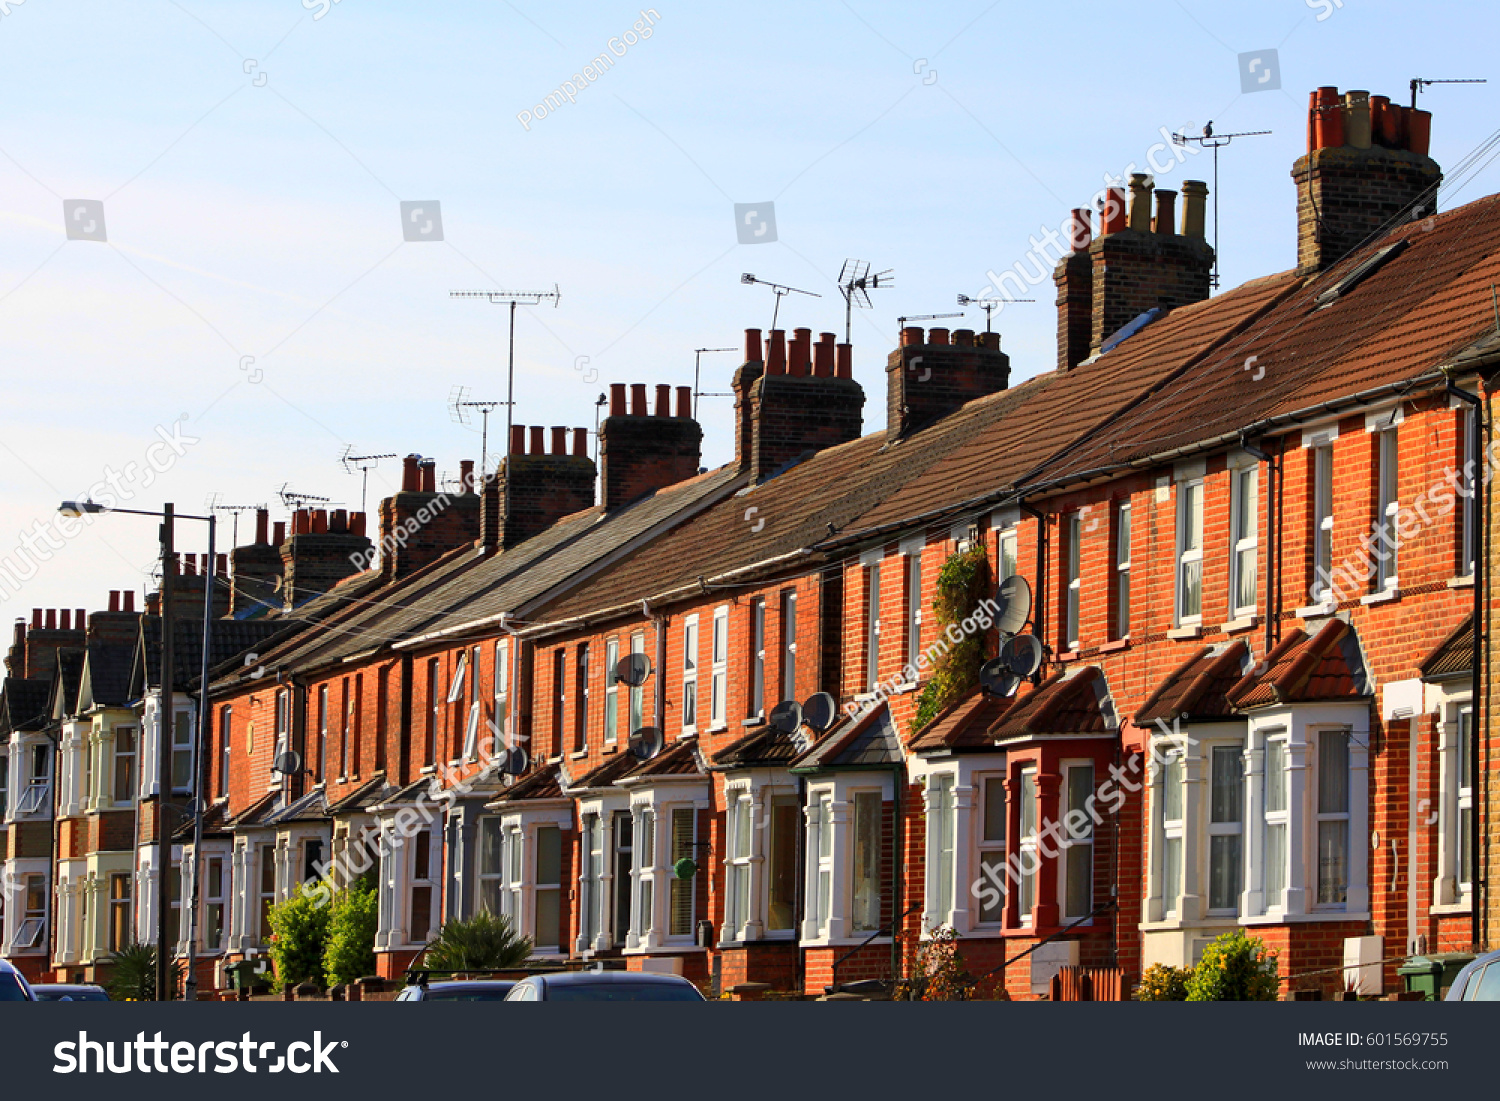 English row terrace house in spring season, England UK. Brick building in the town. #601569755